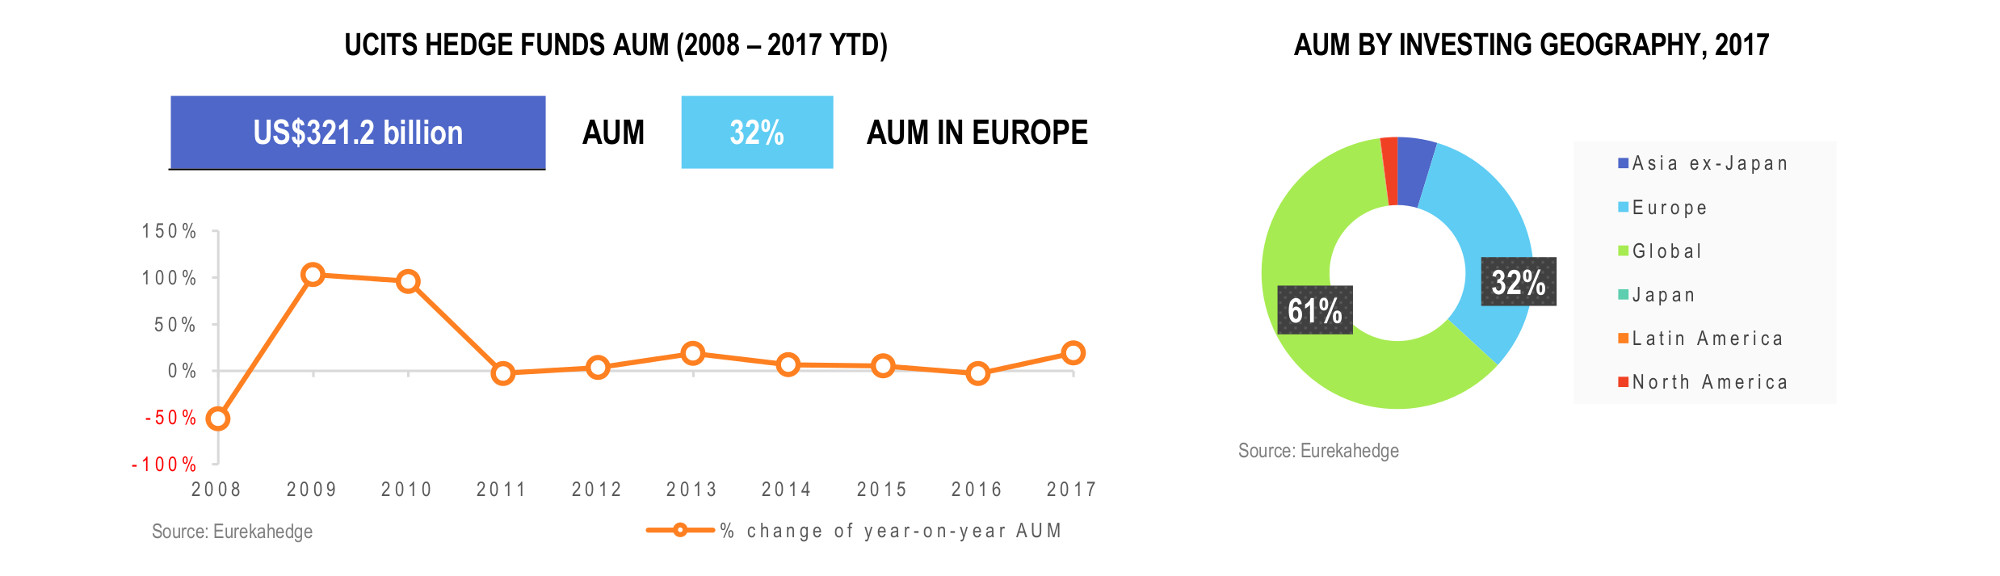 UCITS Hedge Funds Infographic February 2018 - AUM